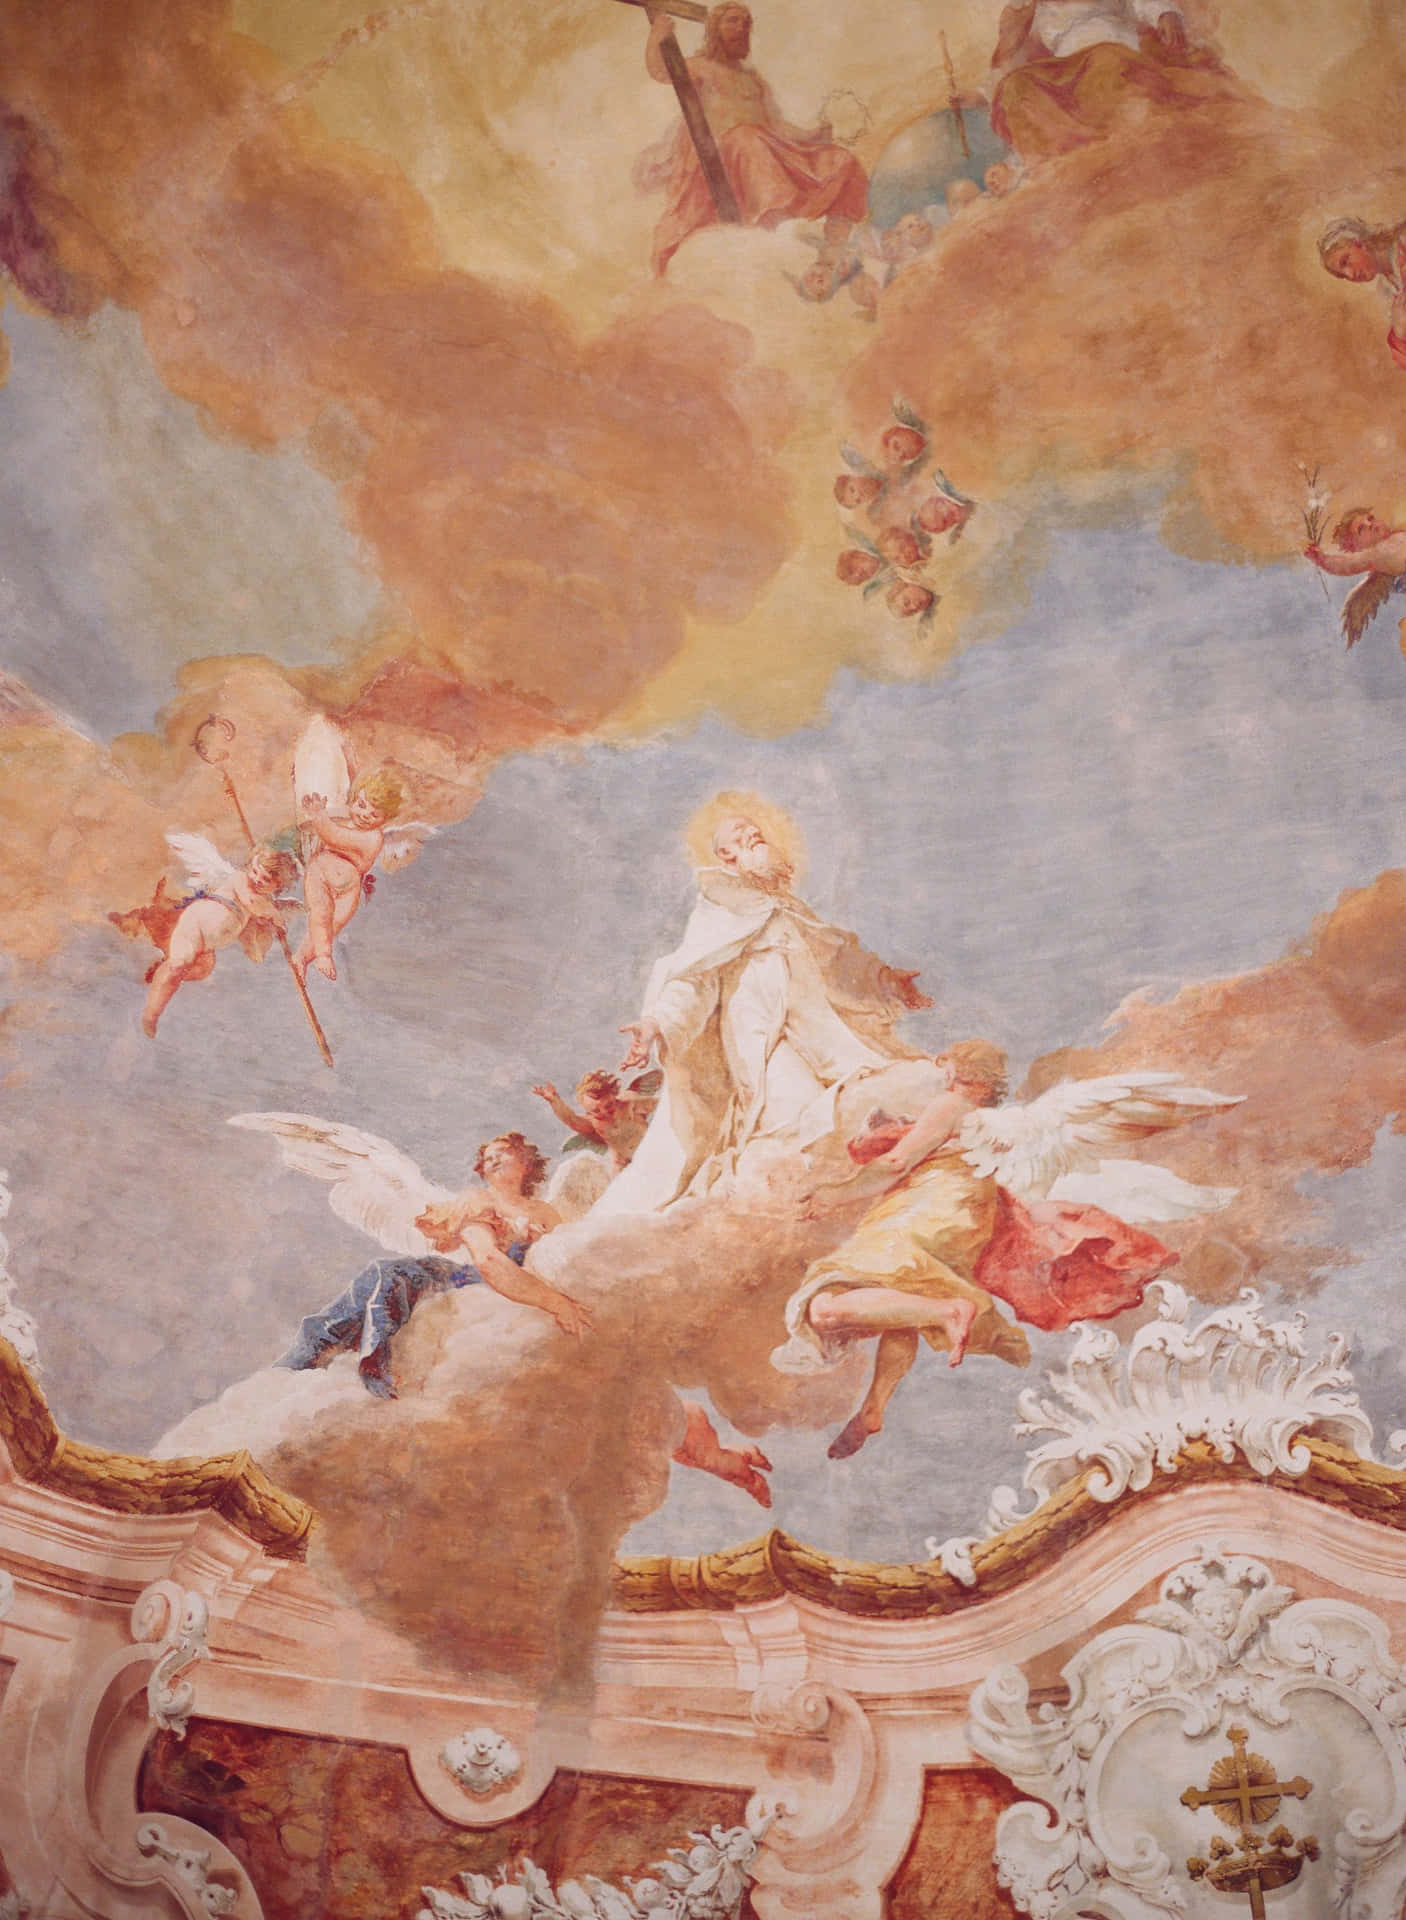 An appreciation of beauty and harmony during the Renaissance period. Wallpaper